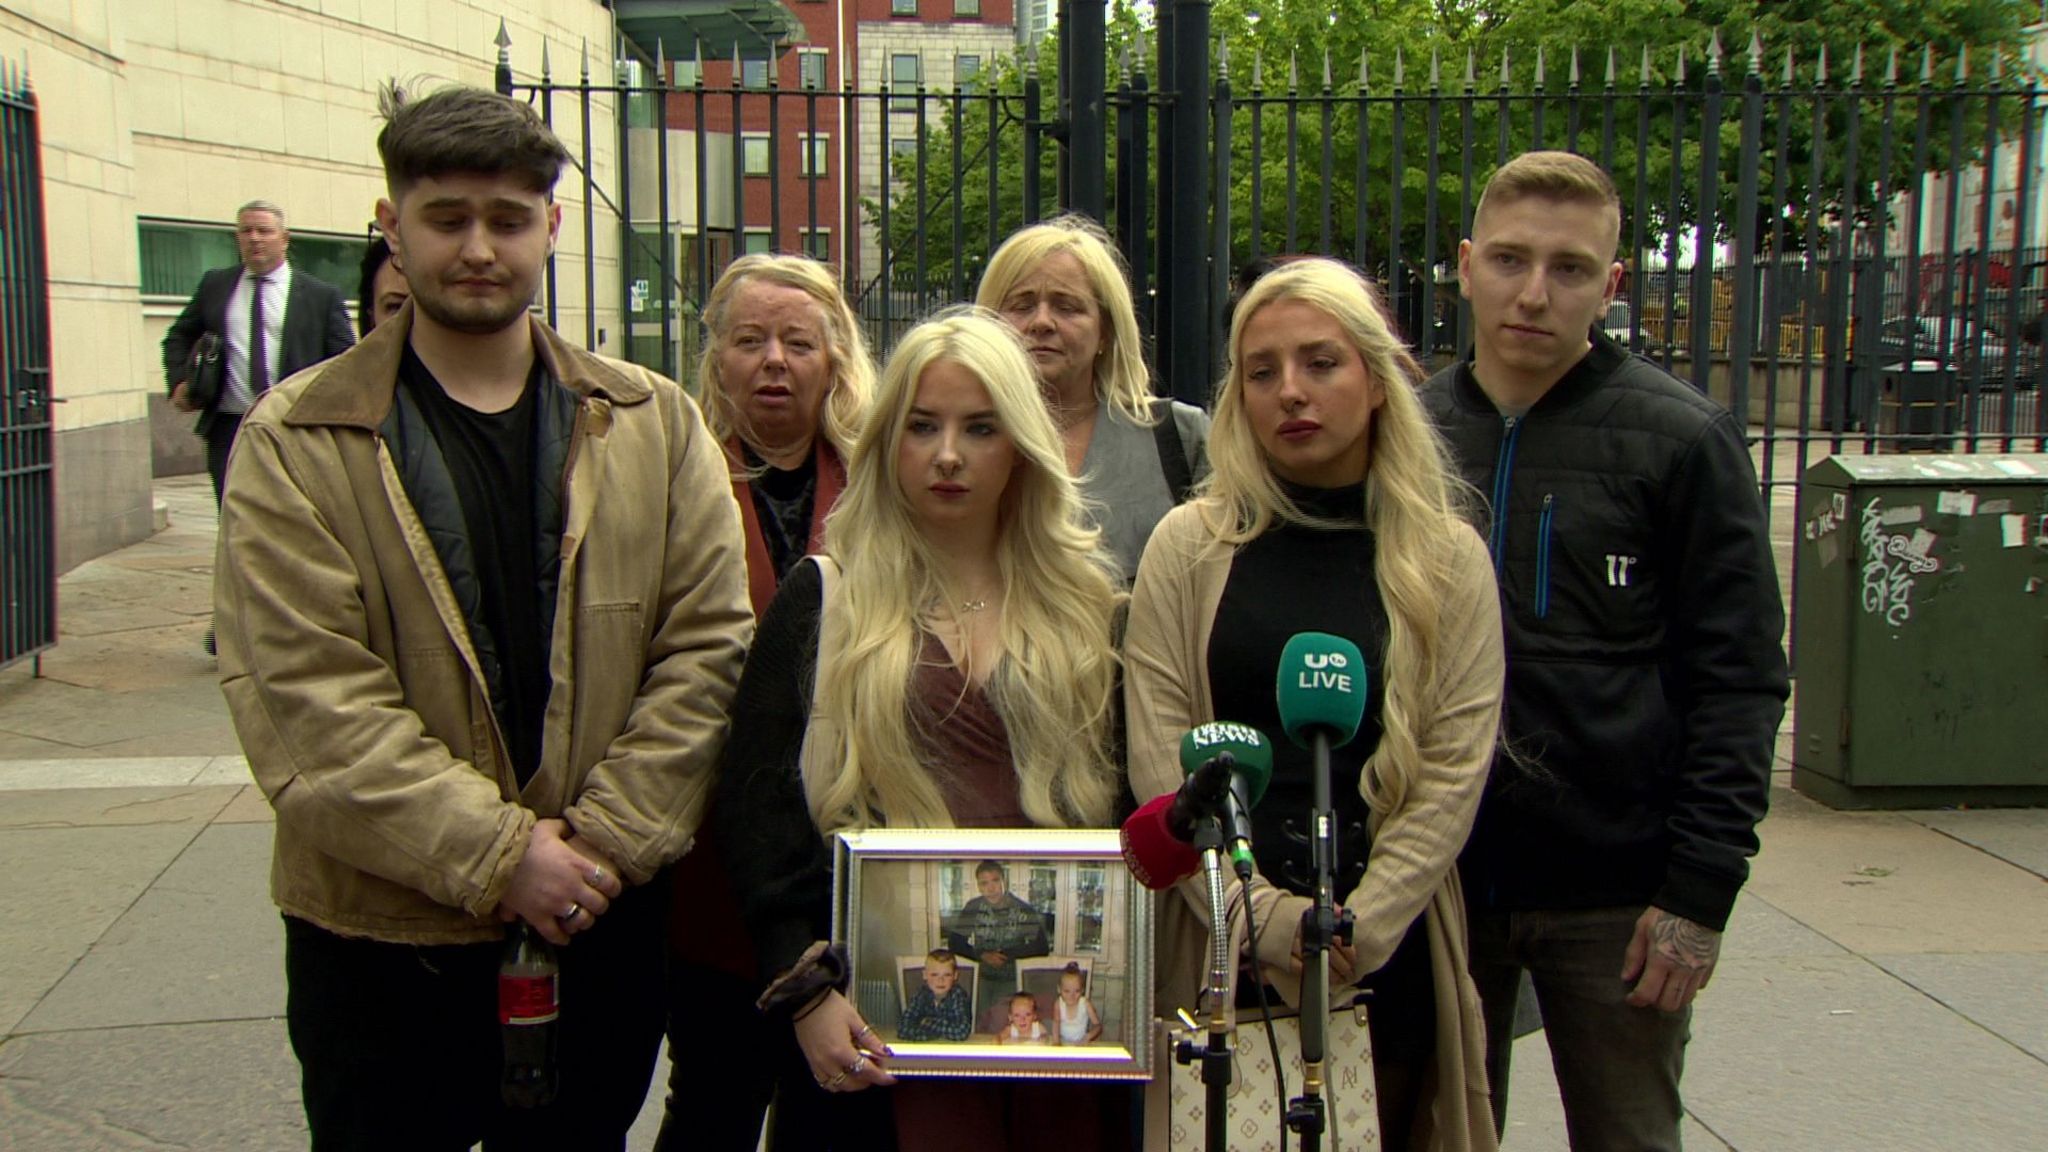 Tony Browne's family outside court on Wednesday - his daughter holds a picture of her dad with his three children 